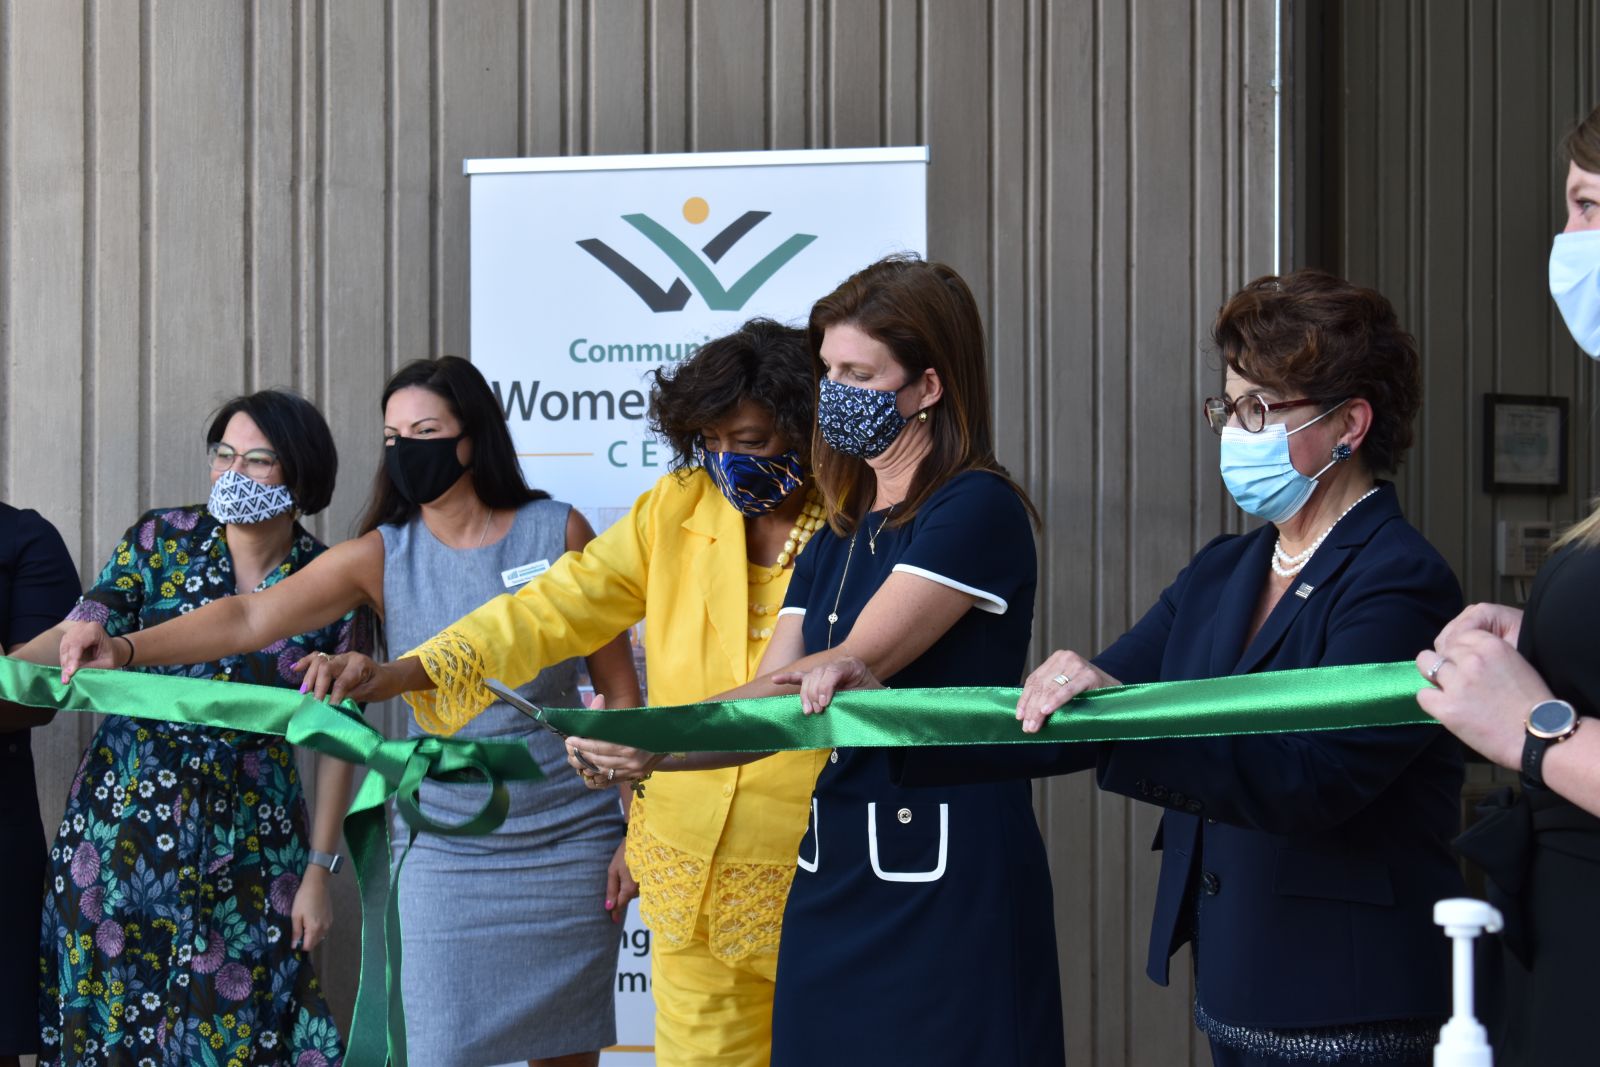 Lt. Gov. Pamela Evette, SBA Administrator Jovita Carranza, Greenville City Councilor Lillian Brock Flemming, CommunityWorks CEO Tammie Hoy-Hawkins and Women's Center Director Ana Perra cut the ribbon one of two SBA women's business centers in the state. (Photo/Molly Hulsey)